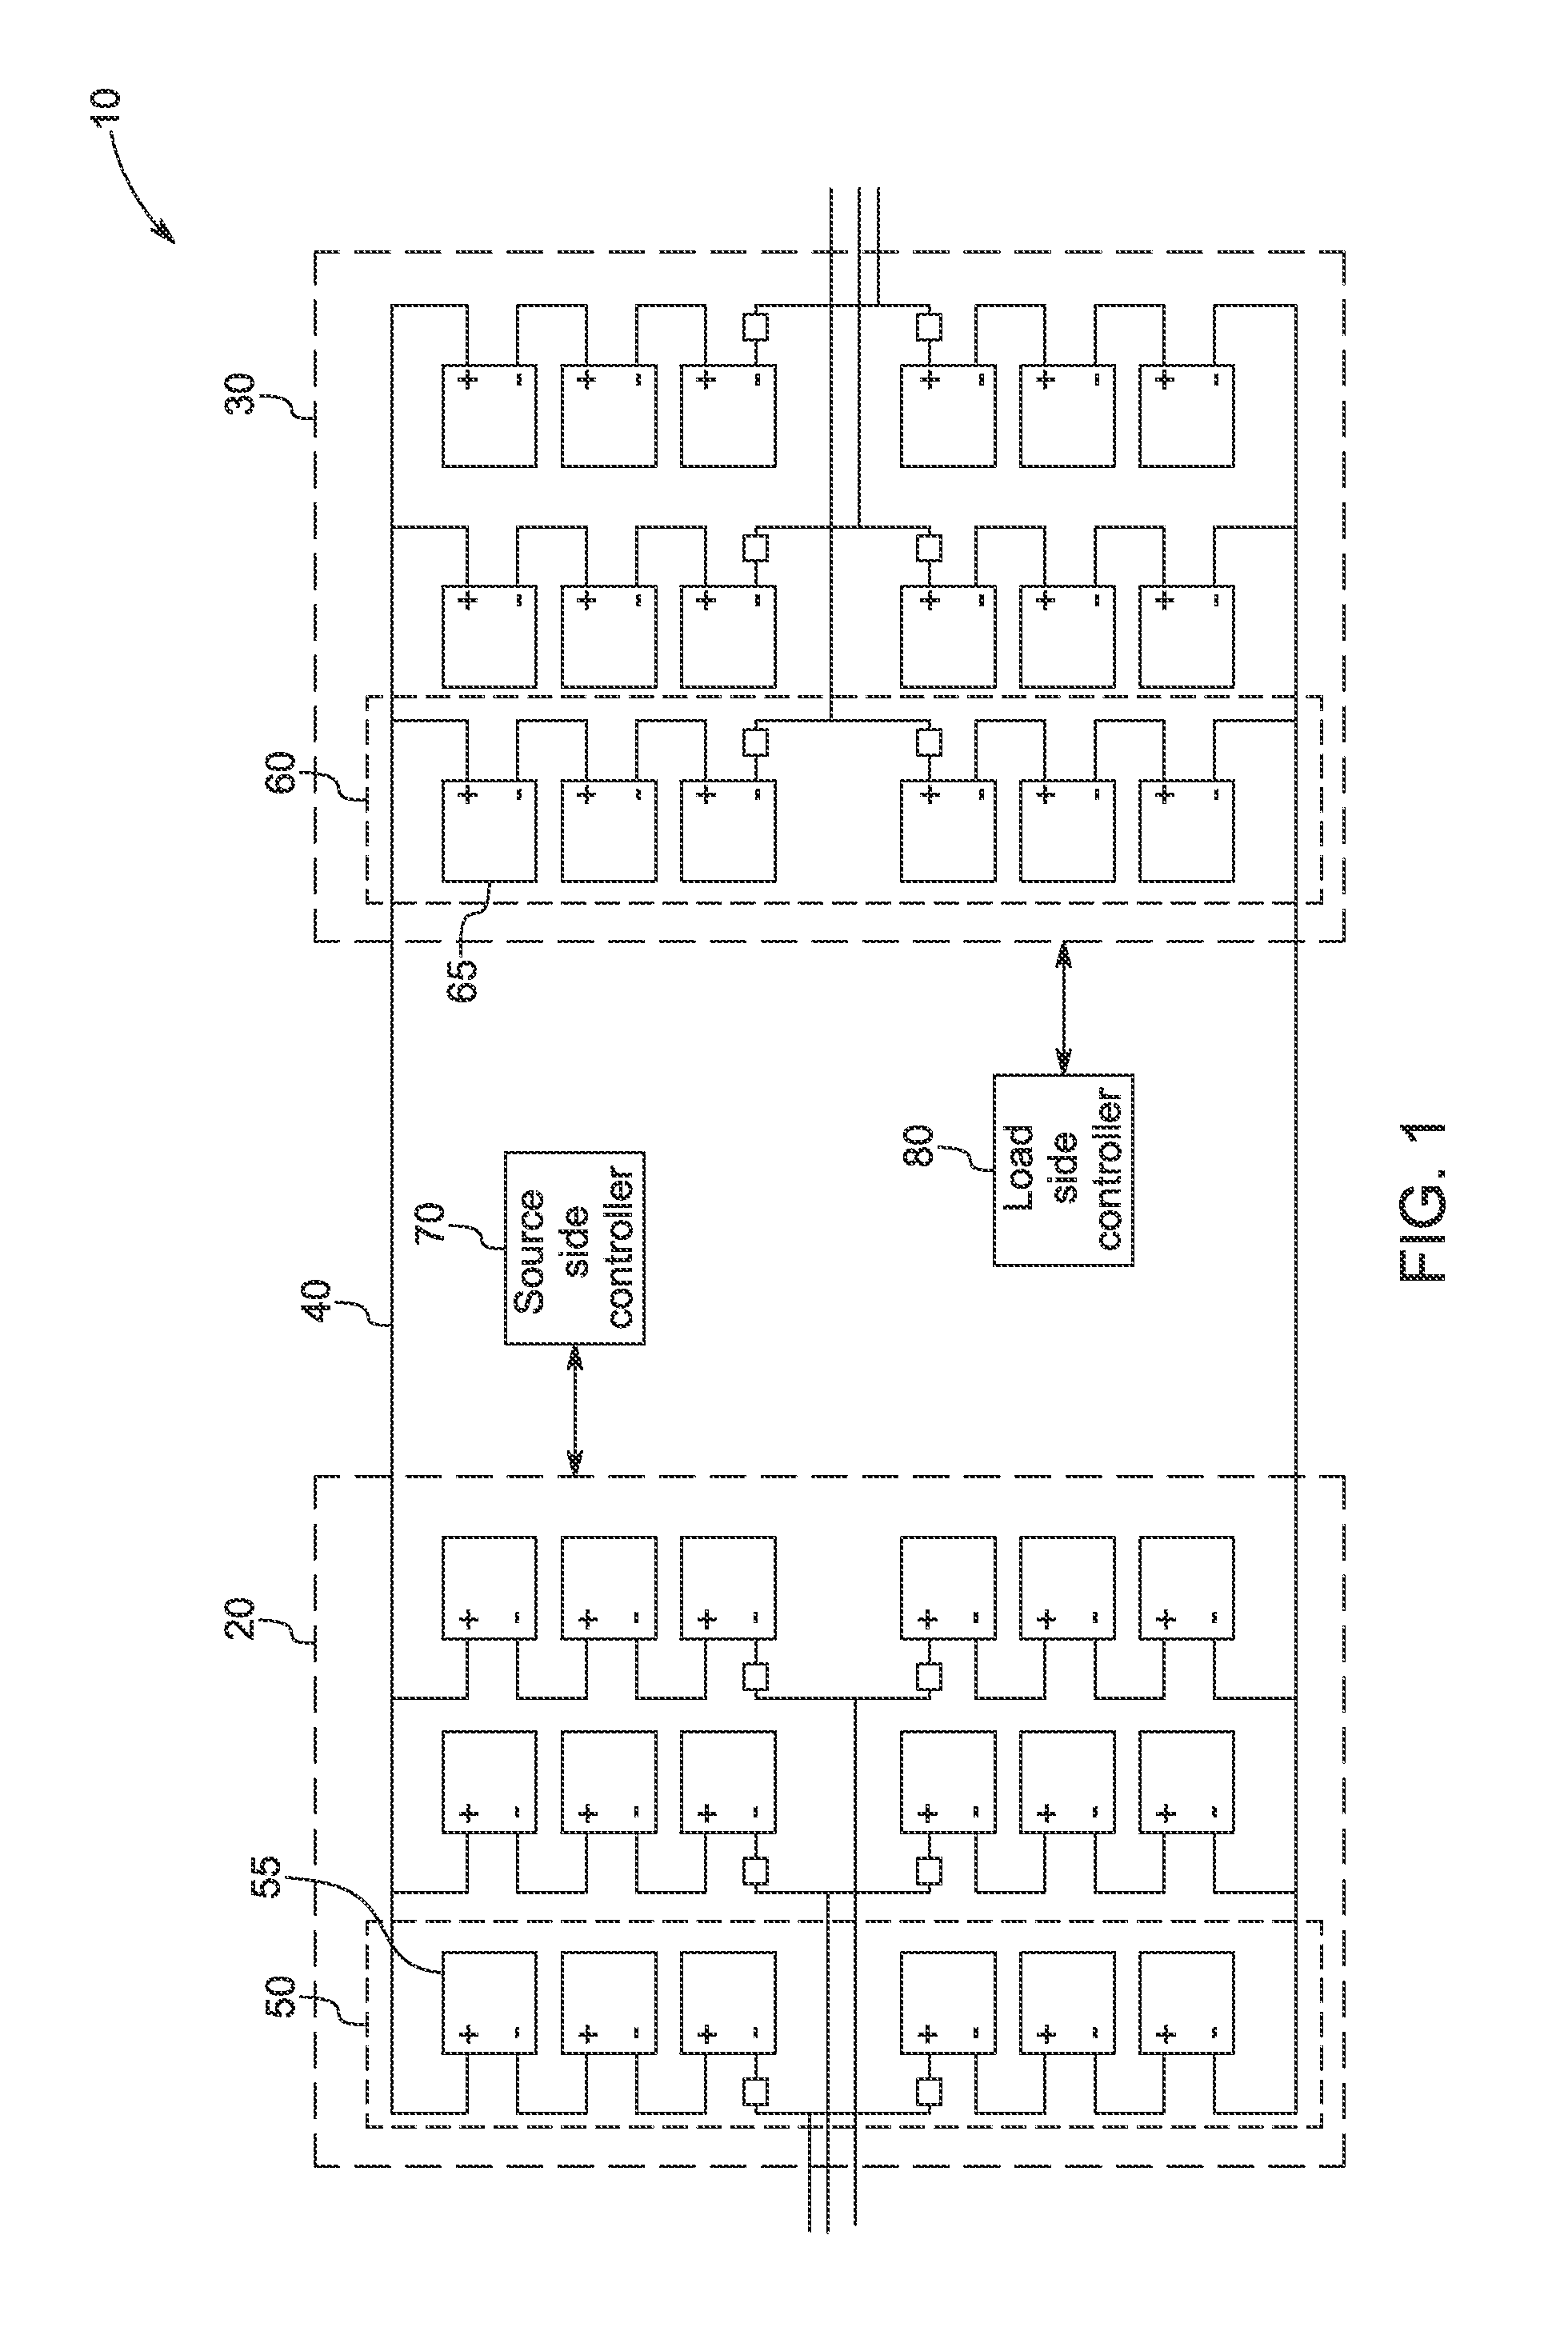 Modular multi-level power conversion system with DC fault current limiting capability